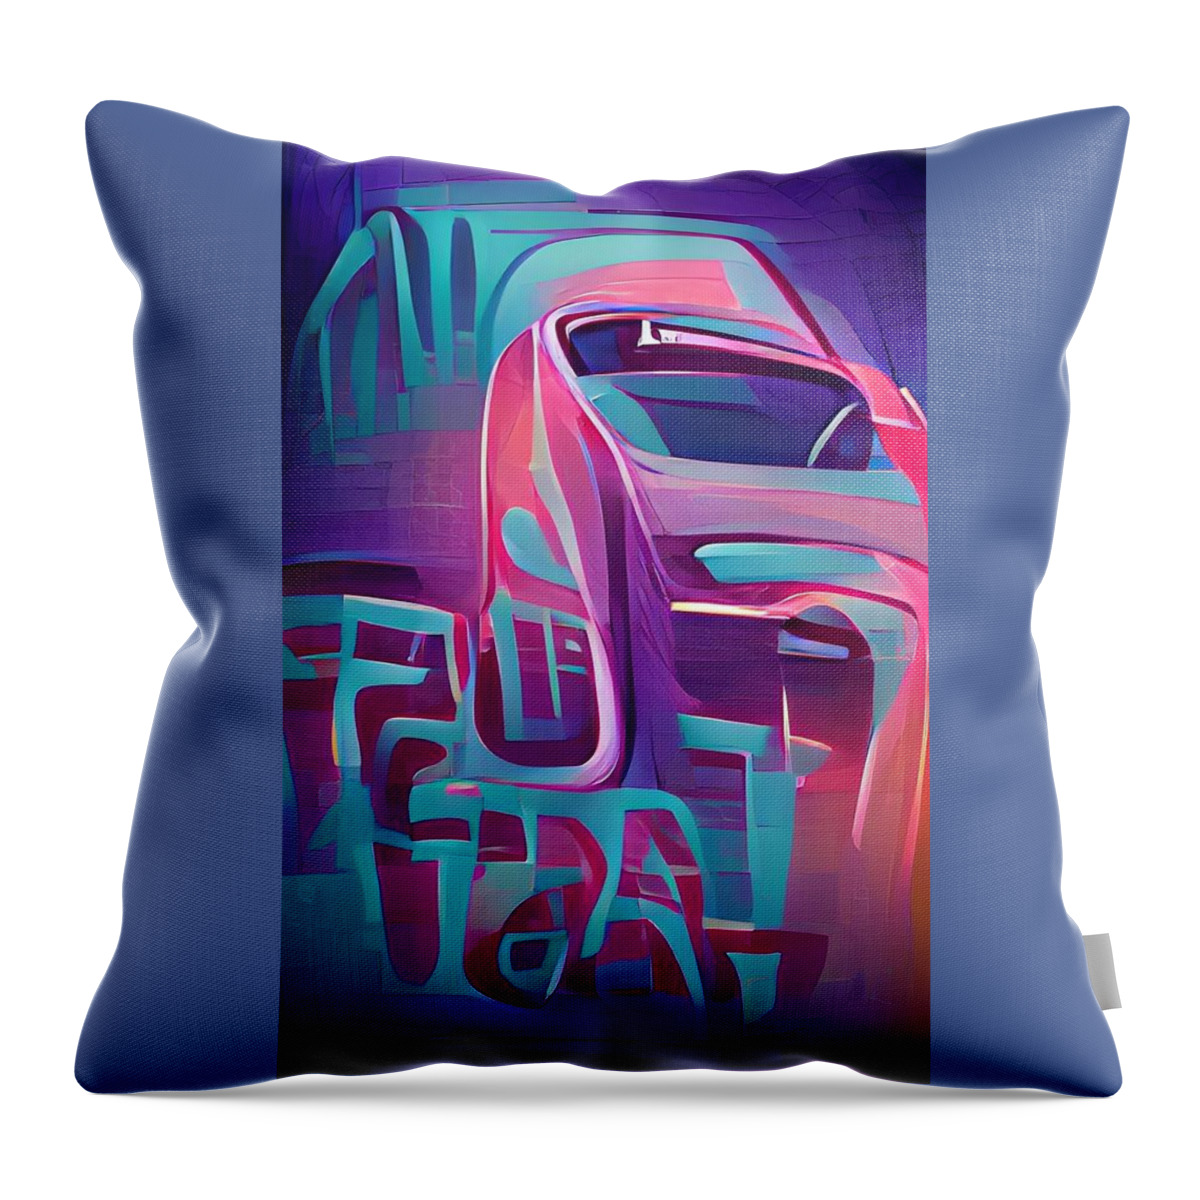  Throw Pillow featuring the digital art Peace Watch by Rod Turner